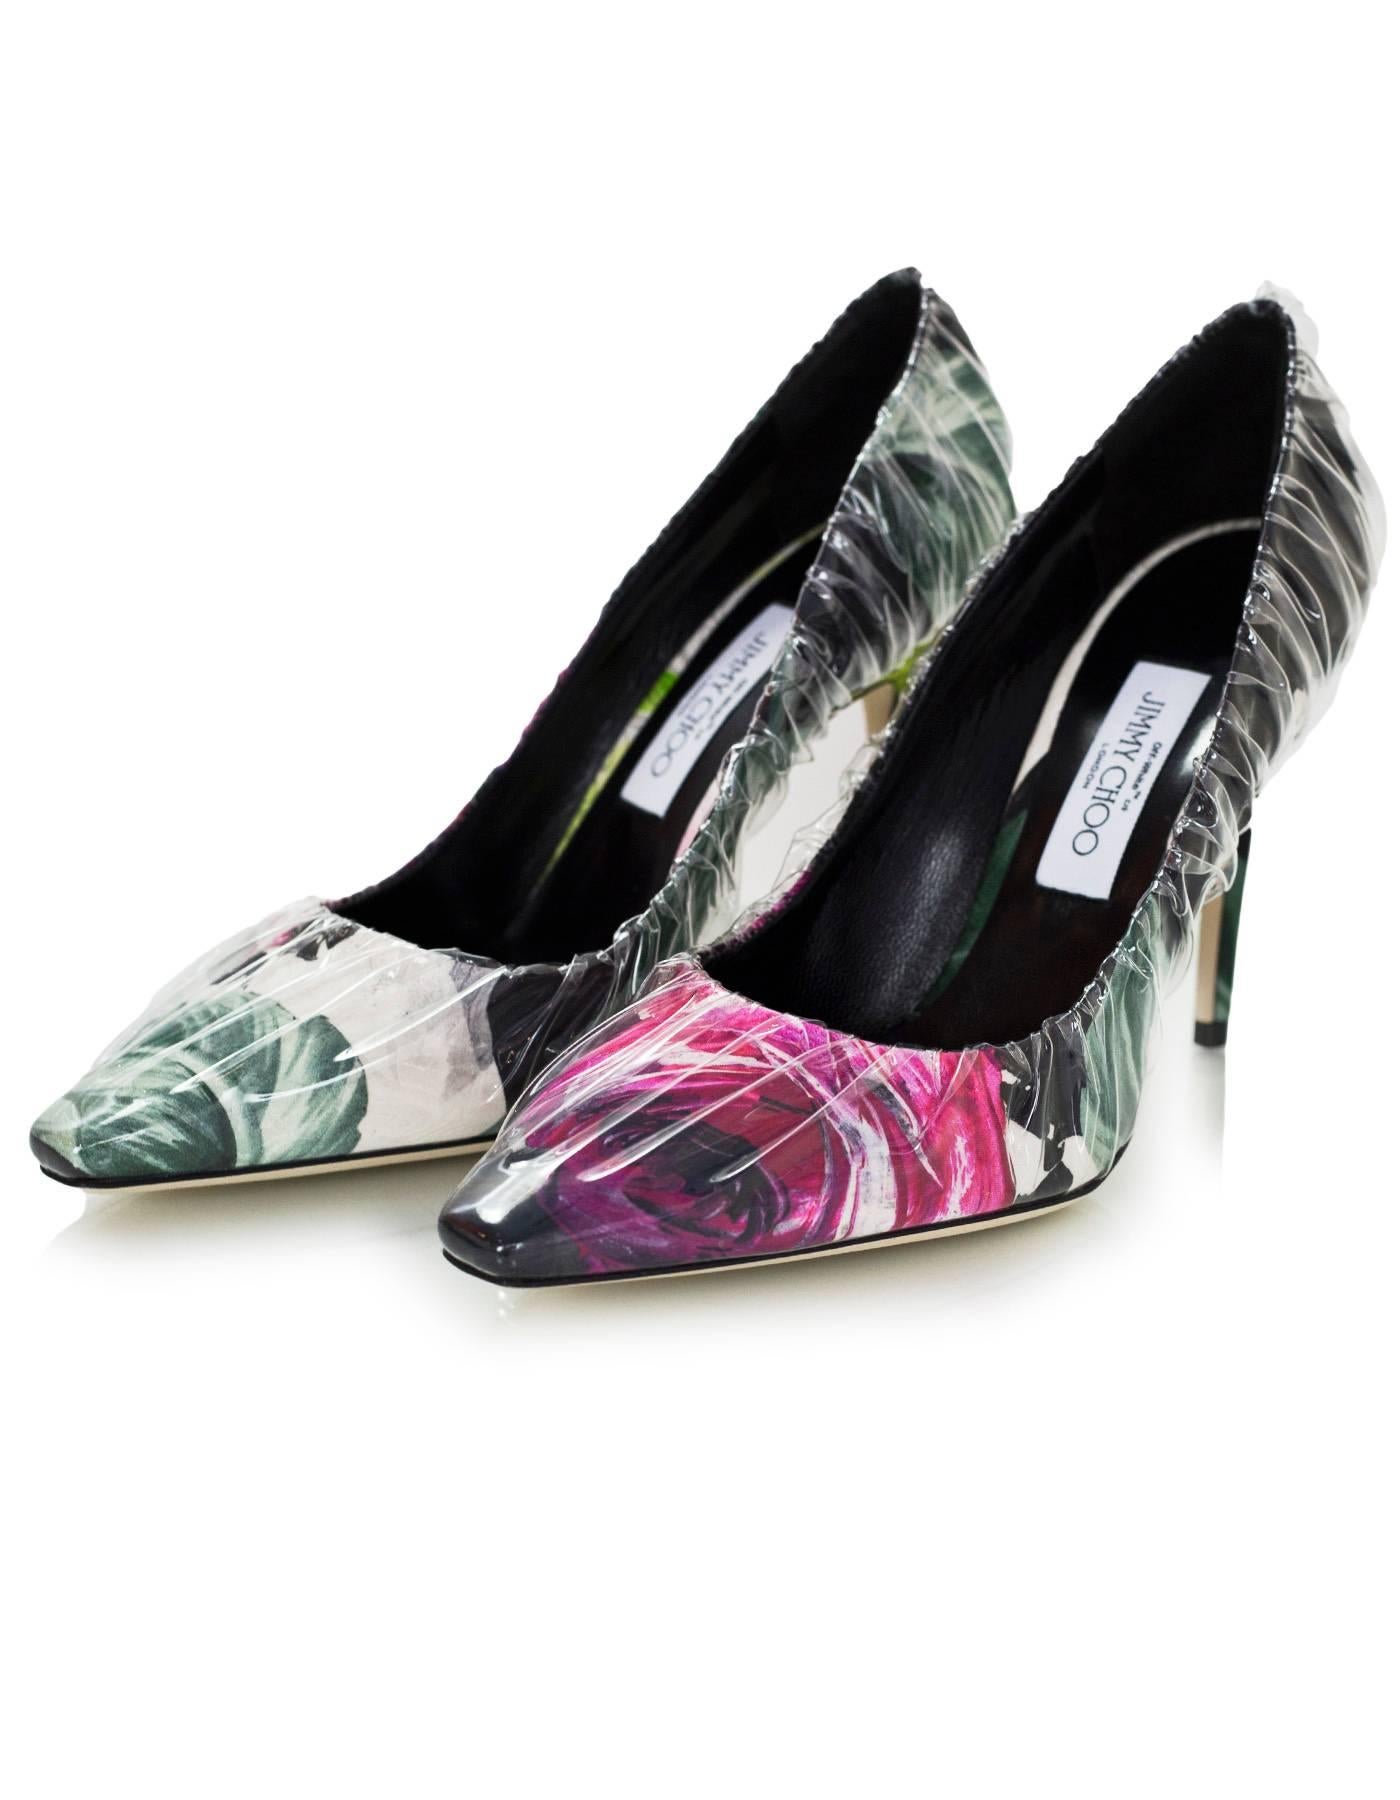 Off-White x Jimmy Choo Floral Printed Chisel Toe Anne 100 Pumps Sz 39.5 NIB

Features ruched TPU

Made In: Italy
Color: Black, green, pink, clear
Materials: Fabric, TPU
Closure/Opening: Slide on
Sole Stamp: Off-White c/o Jimmy Choo Made in Italy